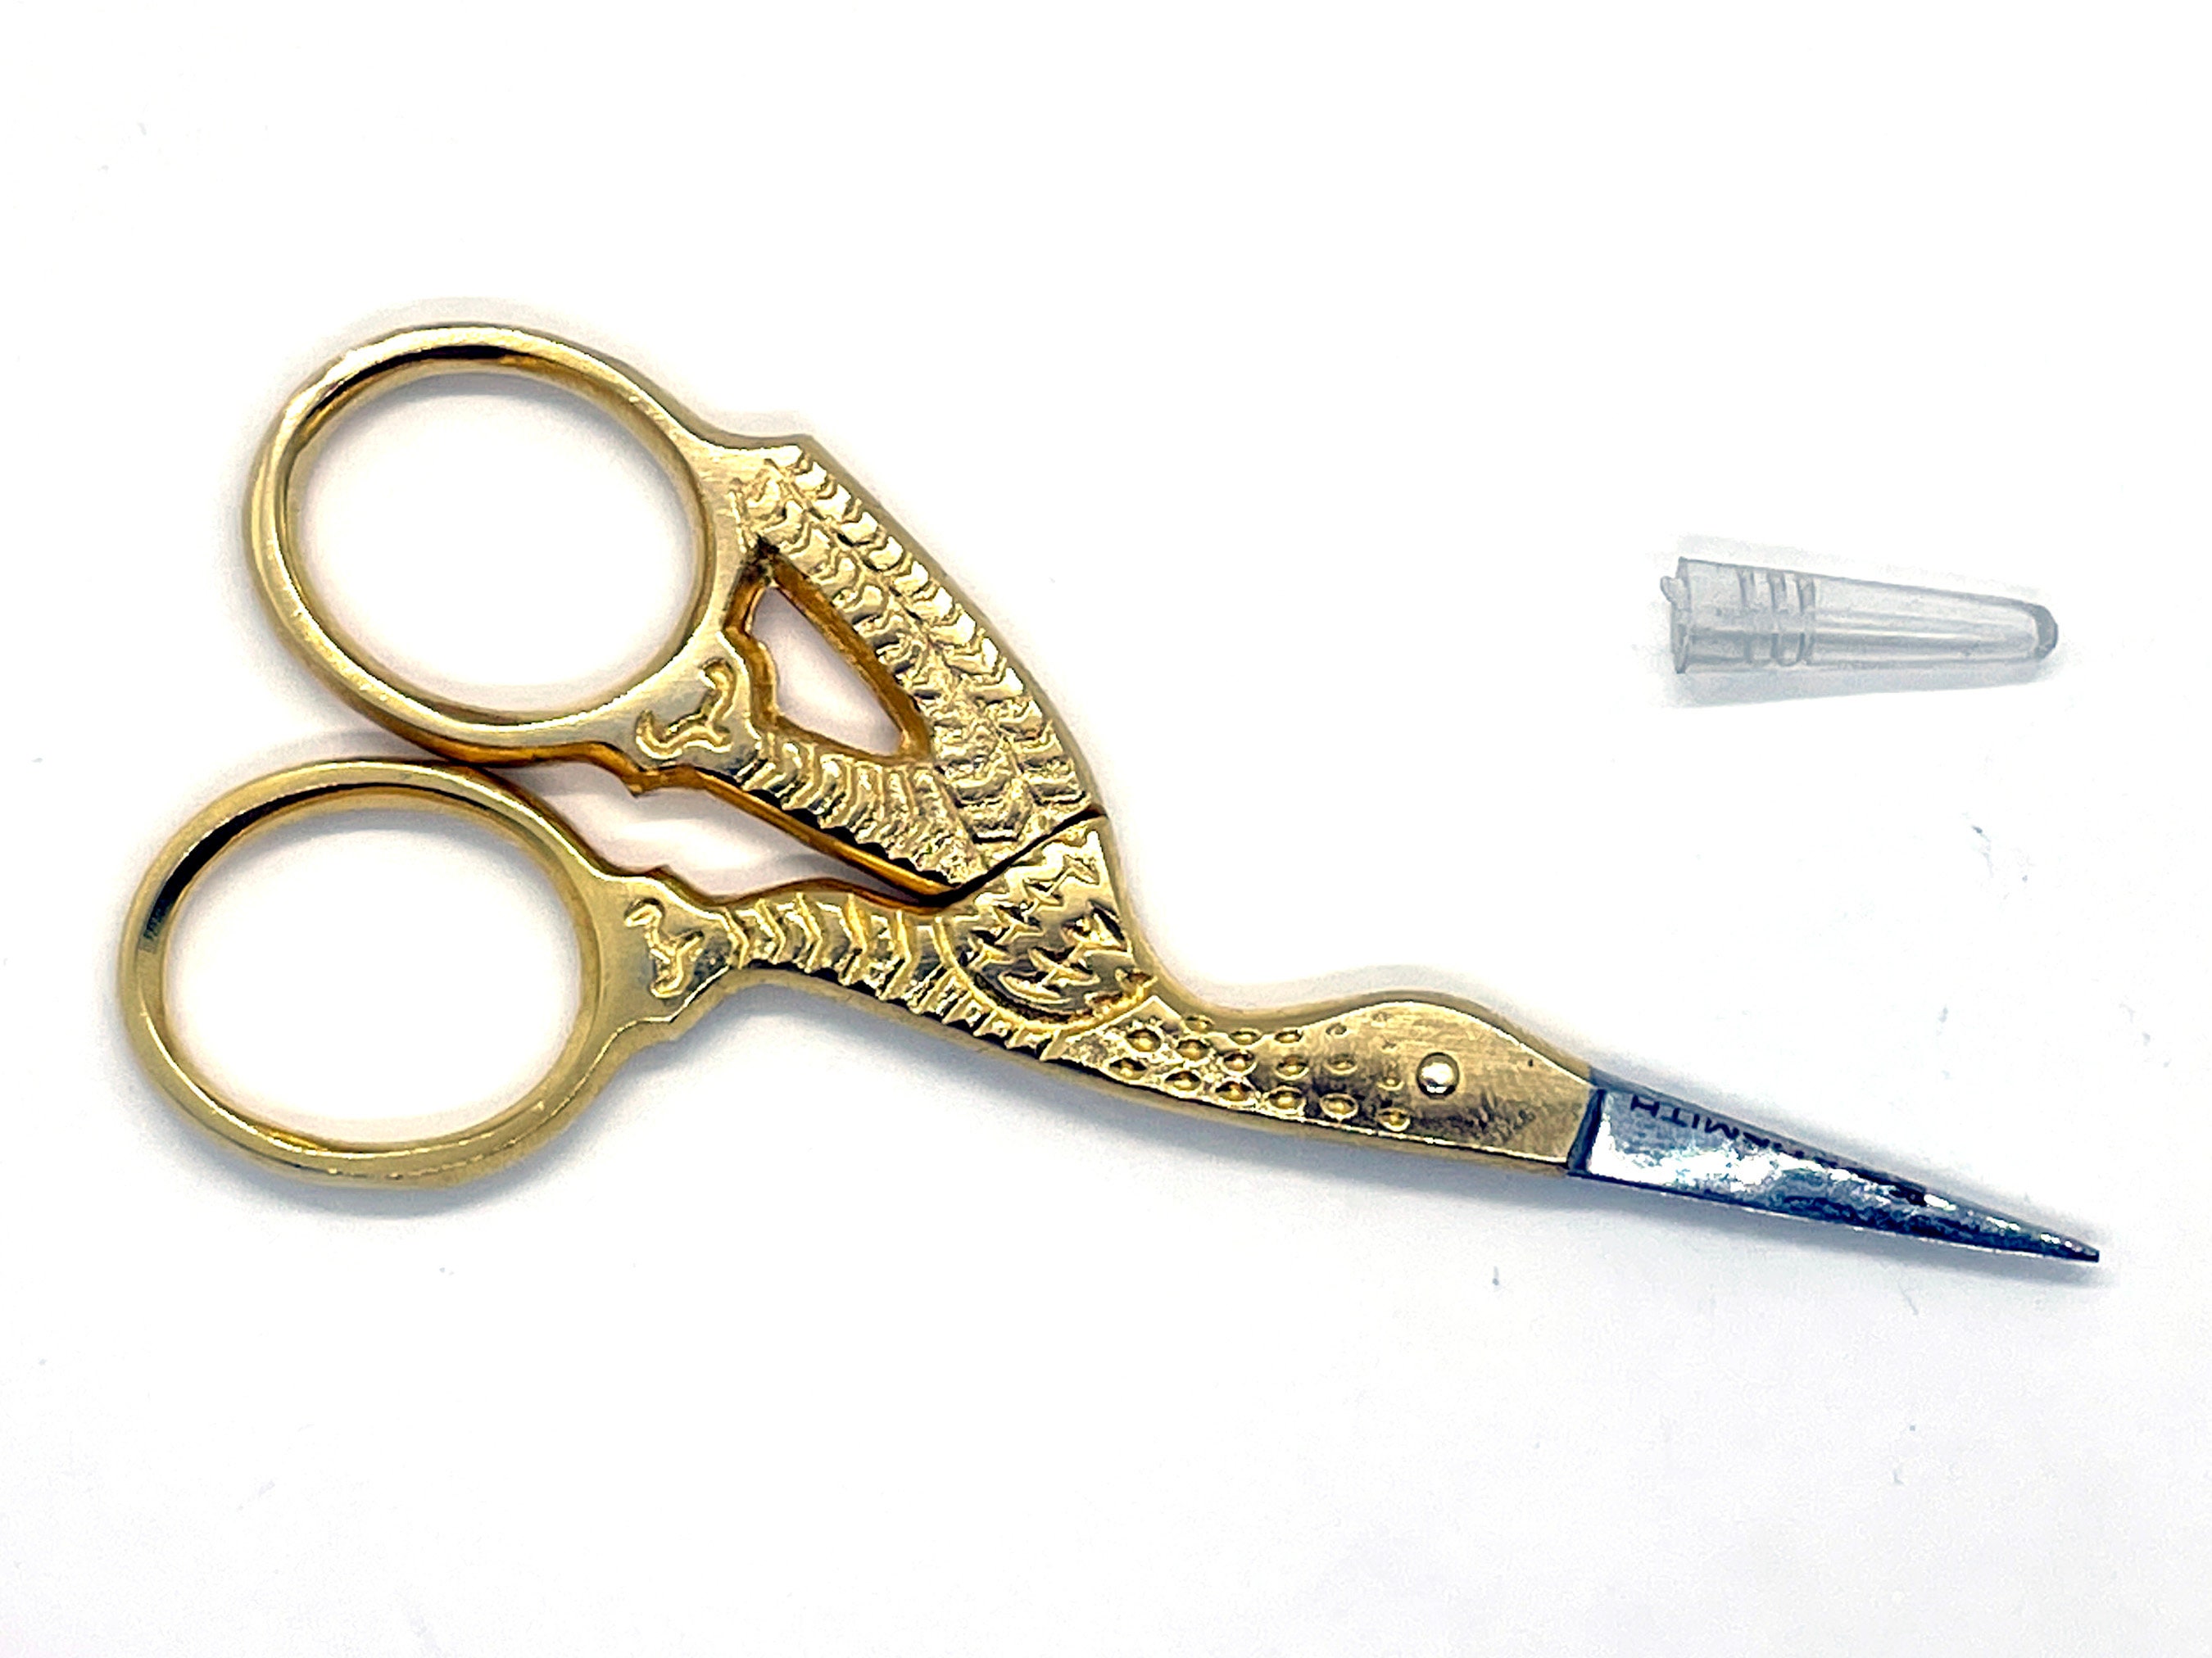 Small Scissors 3.5 Tijeras Embroidery Scissors for Sewing  Gold/bronze/silver Sharp Accessories Vintage Finding Sewing Embroidery 